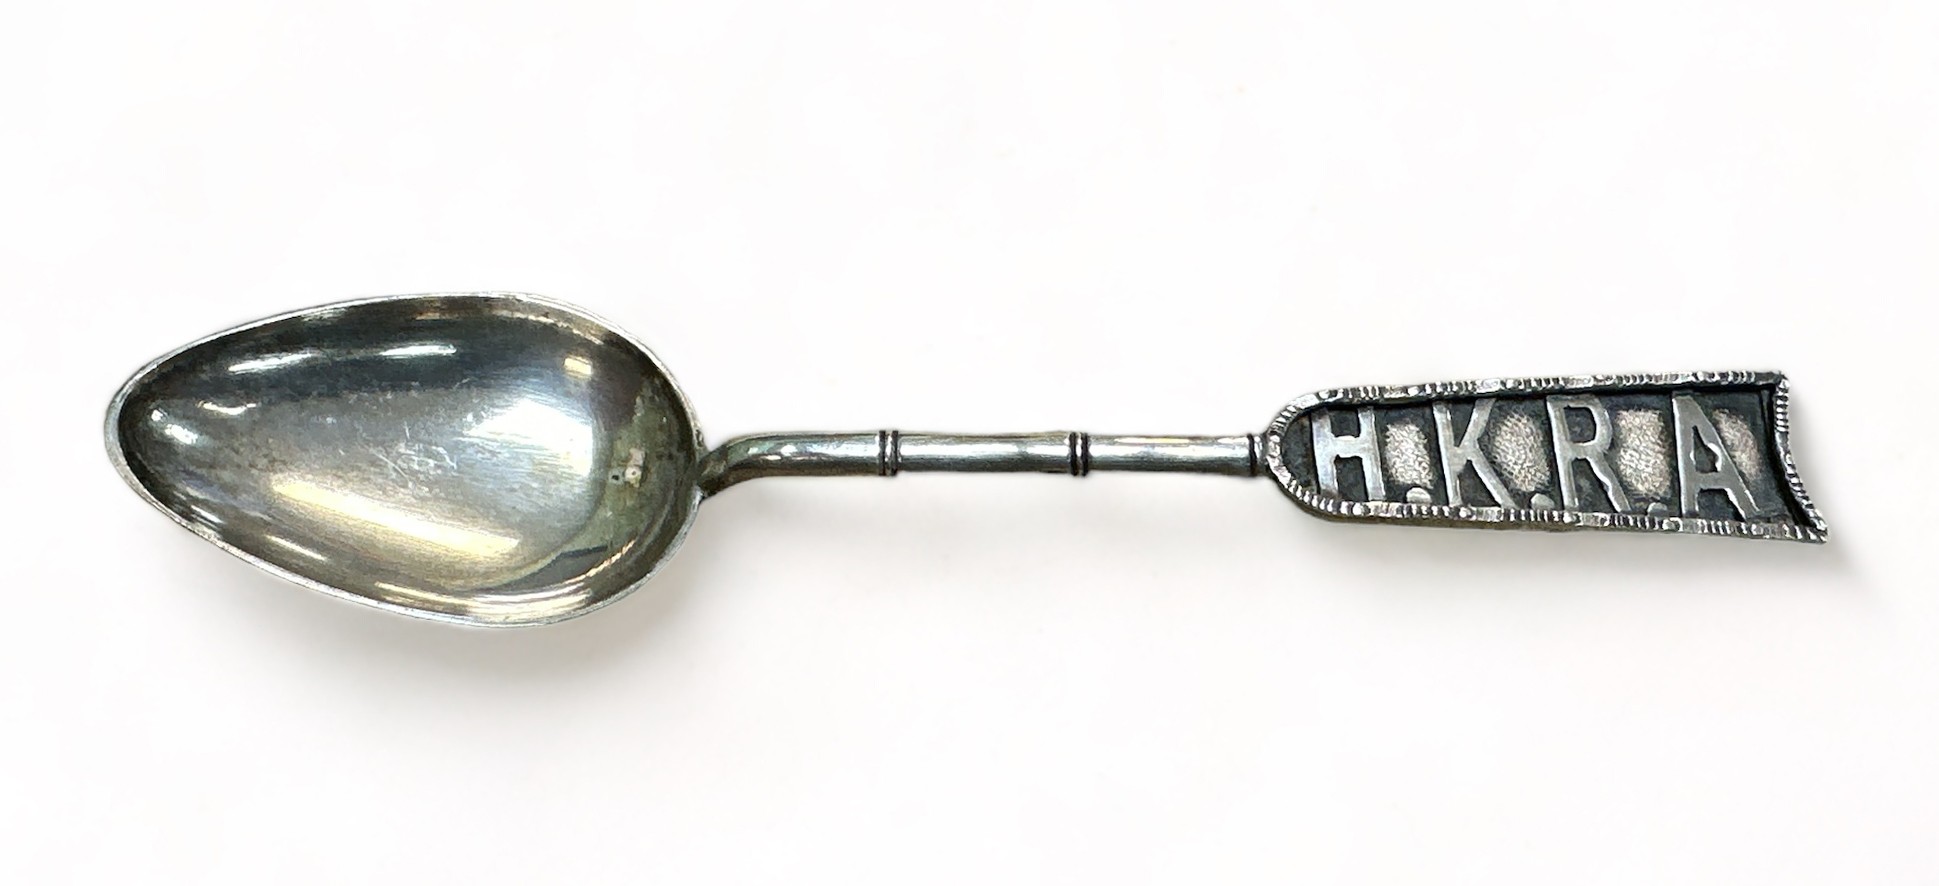 Hong Kong Rifle Association silver teaspoon, H.K.R.A. as handle, reverse of which engraved Cpl